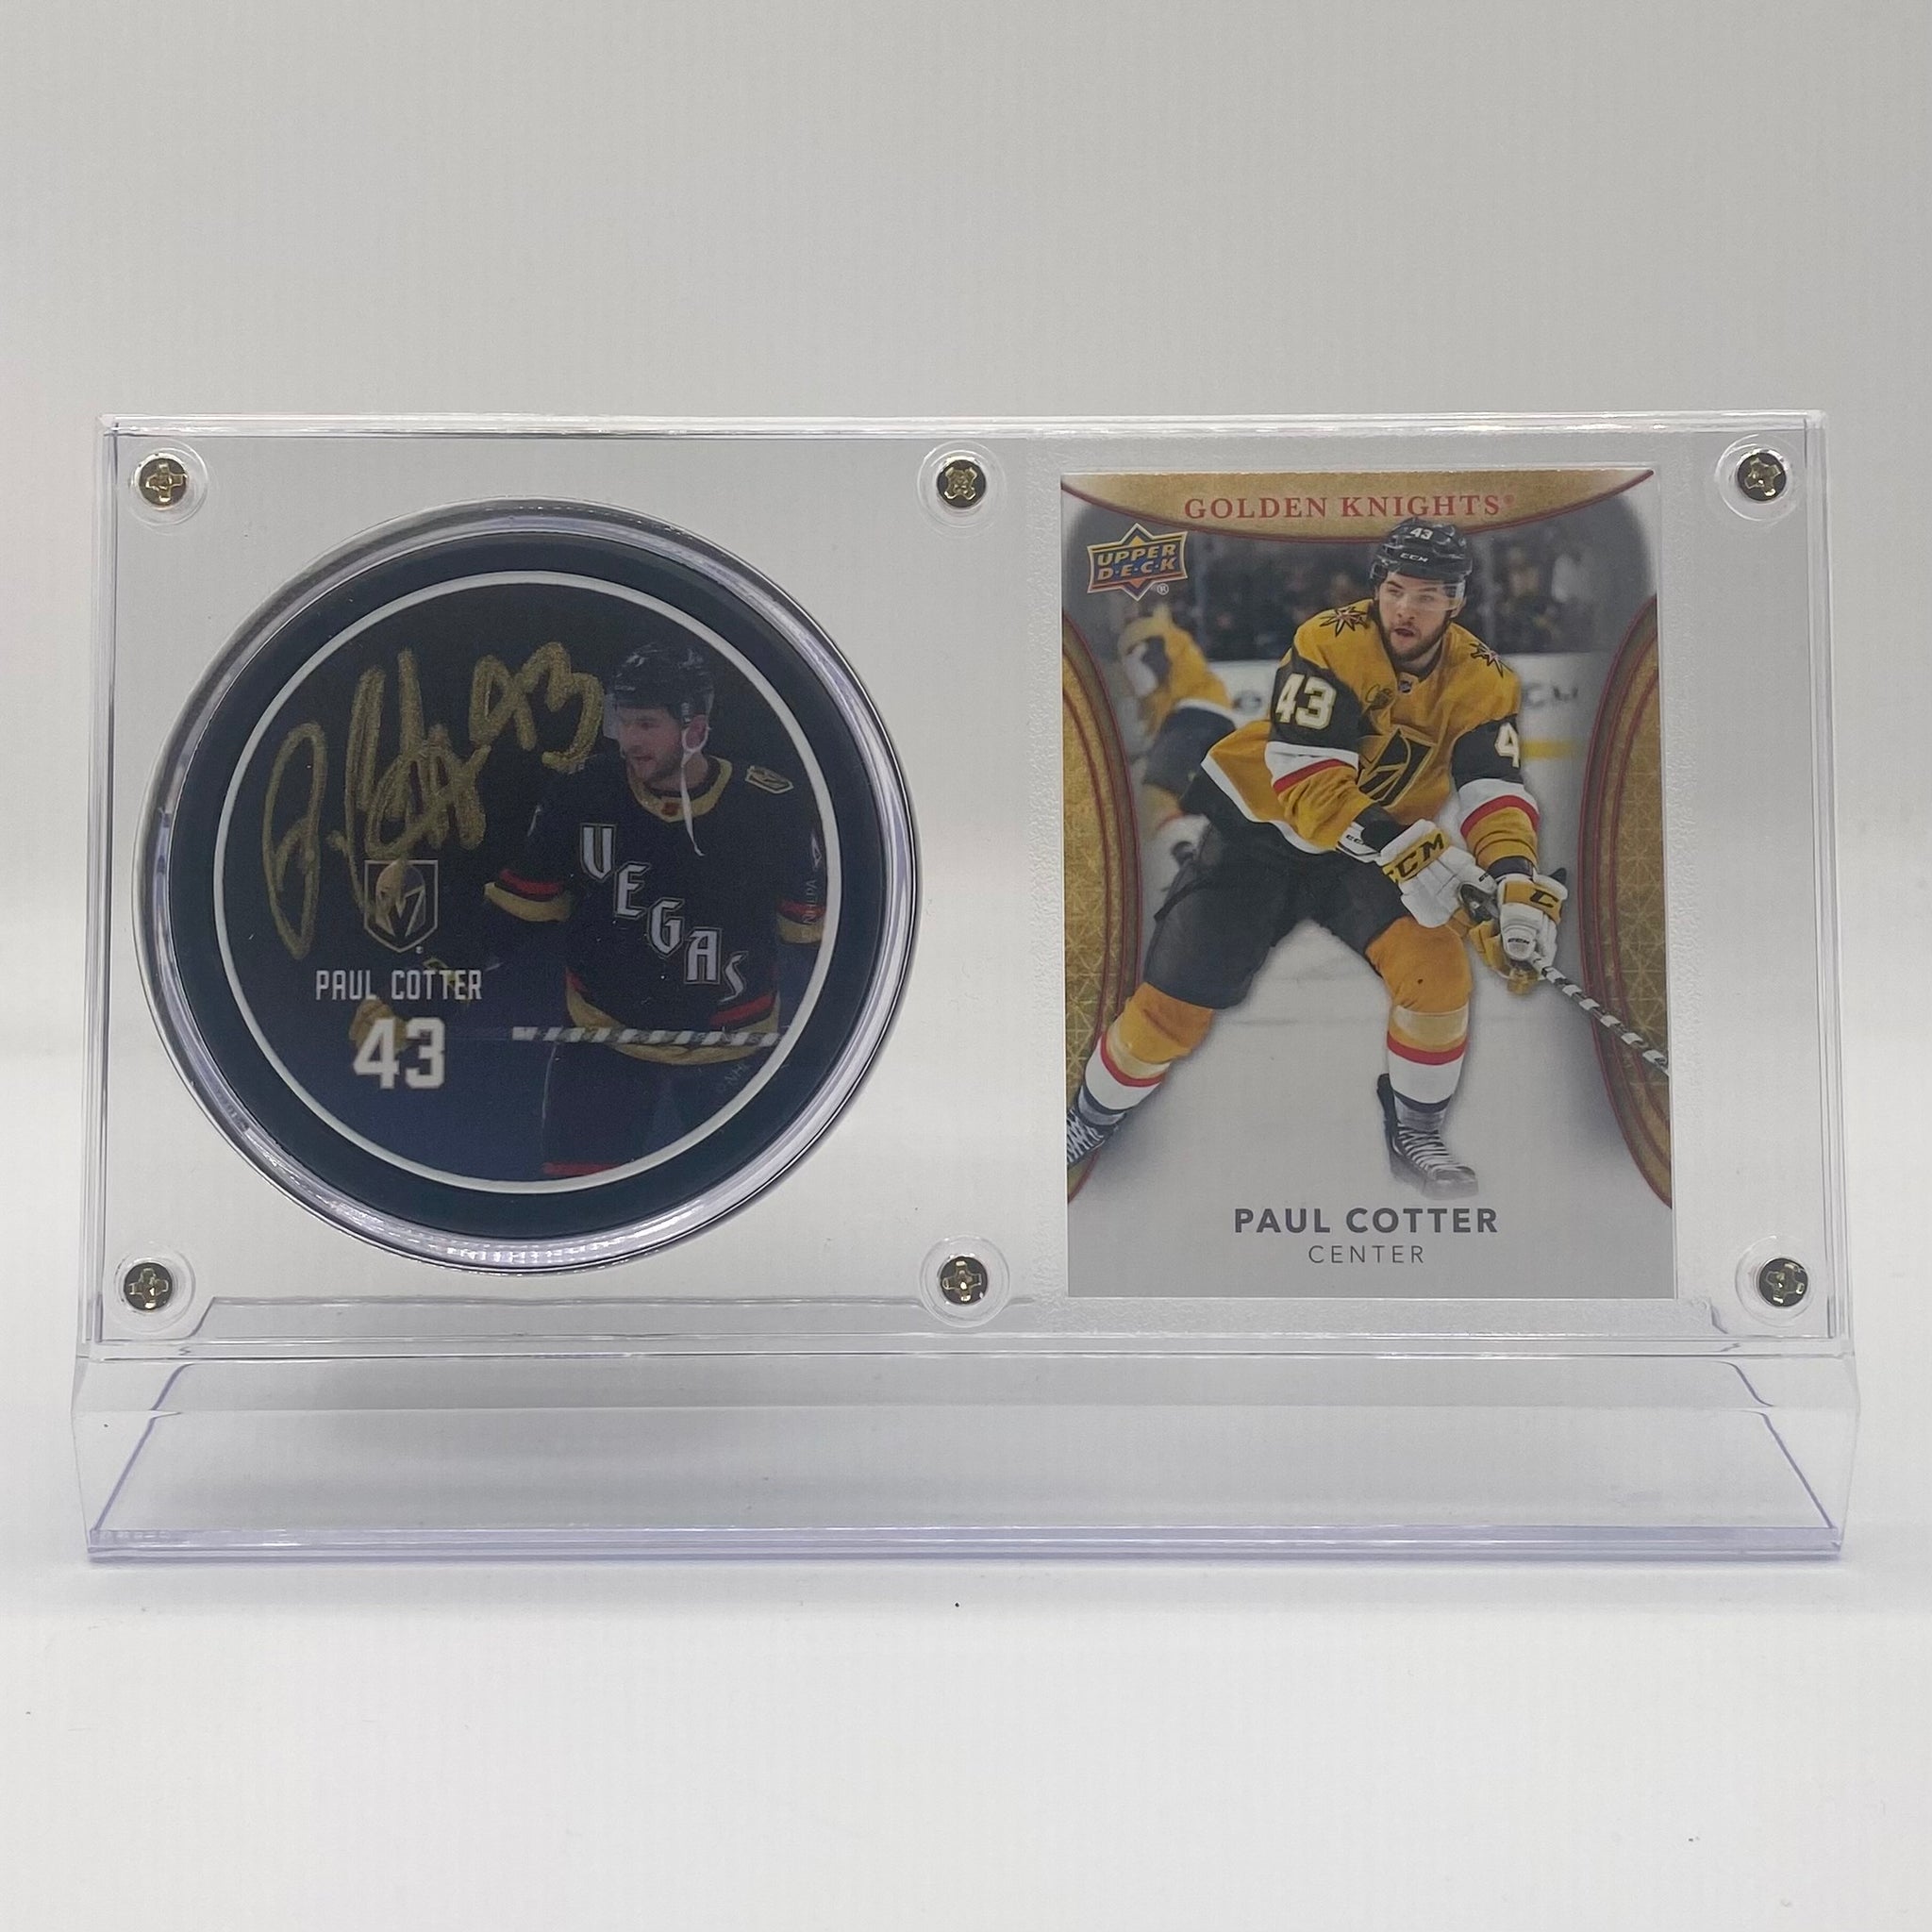 Paul Cotter Vegas Golden Knights Autographed Hockey Puck and Trading Card Case